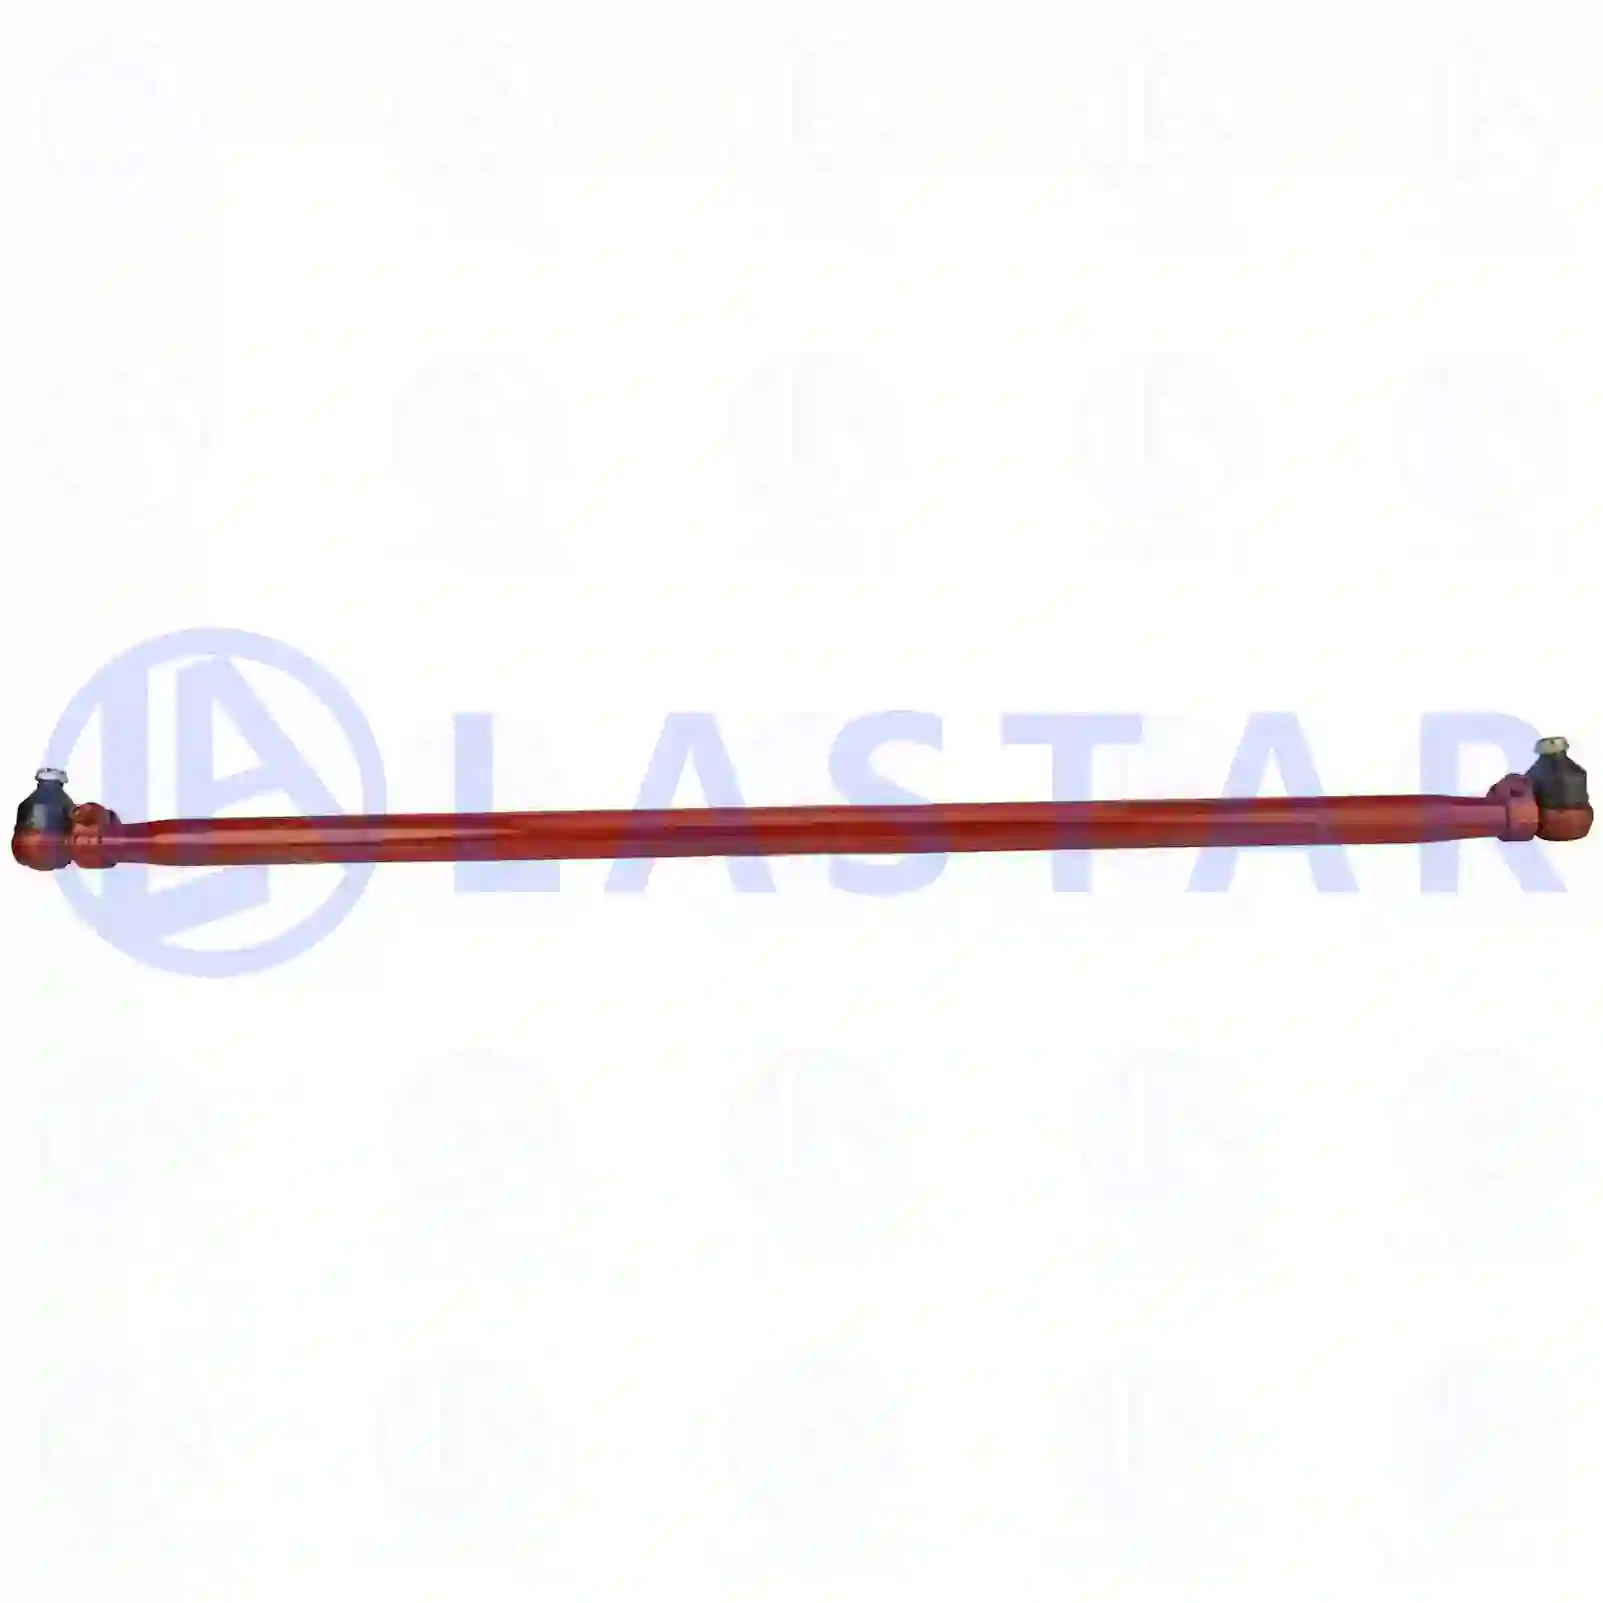 Track rod, 77730716, 3463302903, 3463304303, 3463304403, 3463305003 ||  77730716 Lastar Spare Part | Truck Spare Parts, Auotomotive Spare Parts Track rod, 77730716, 3463302903, 3463304303, 3463304403, 3463305003 ||  77730716 Lastar Spare Part | Truck Spare Parts, Auotomotive Spare Parts